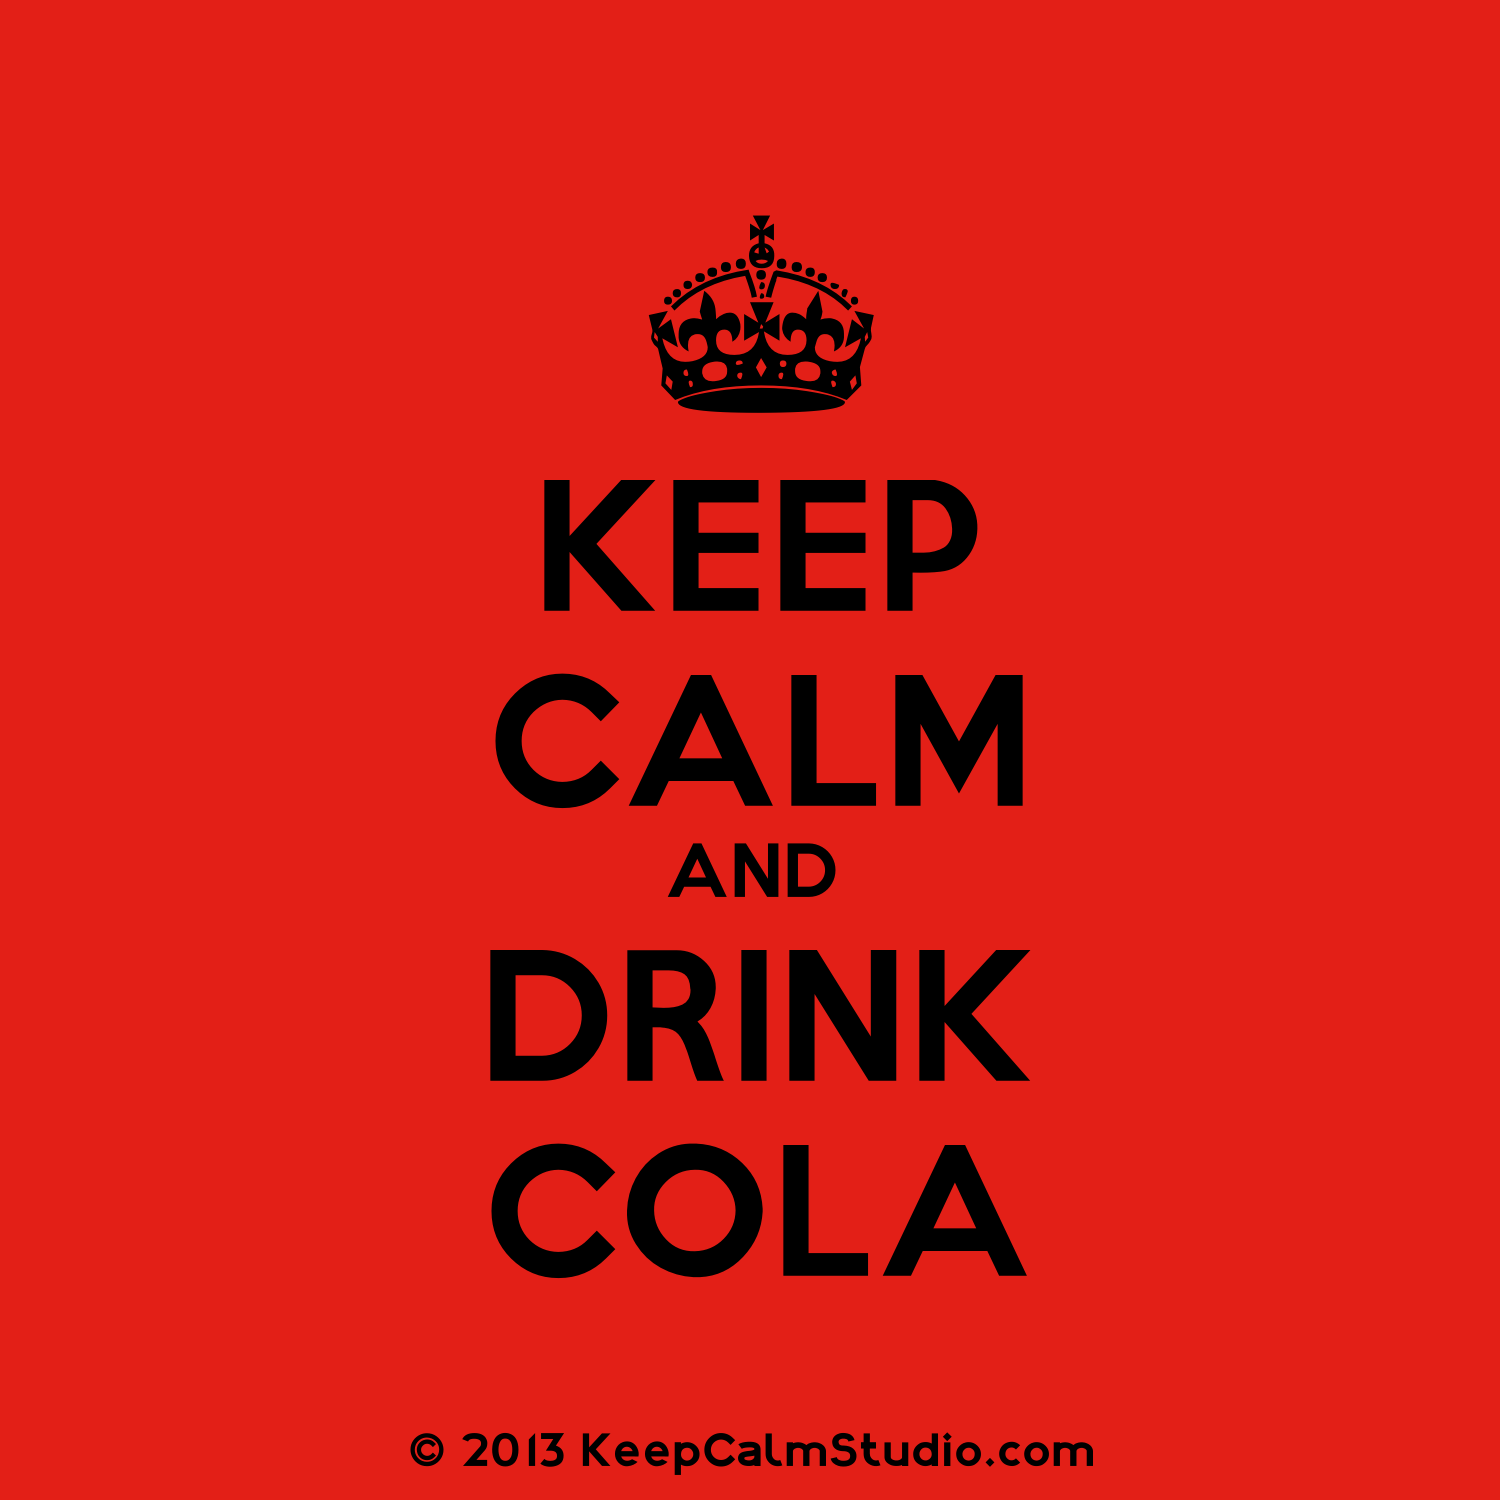 Keep Calm and Drink Vodka' design on t-shirt, poster, mug and many ...